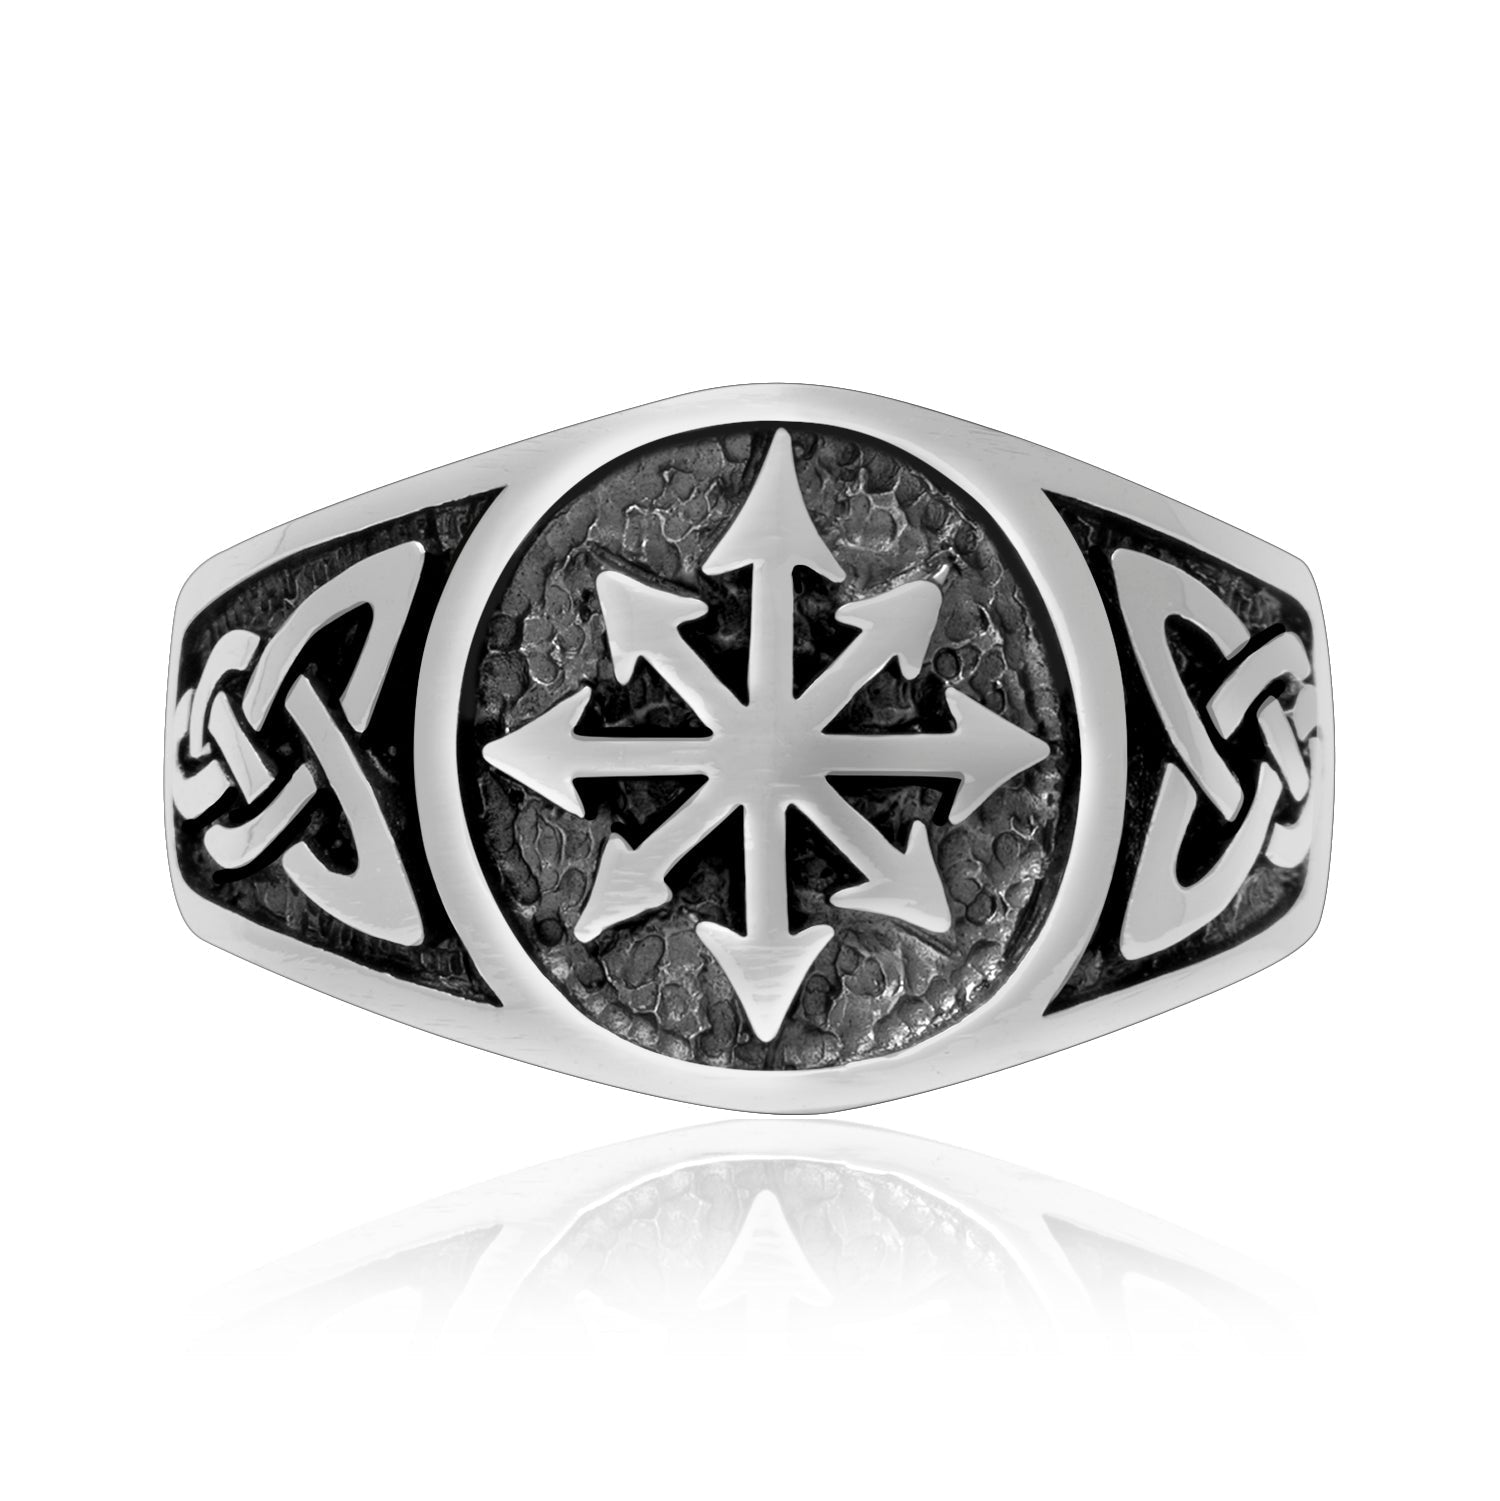 925 Sterling Silver Symbol of Chaos Occult Ring